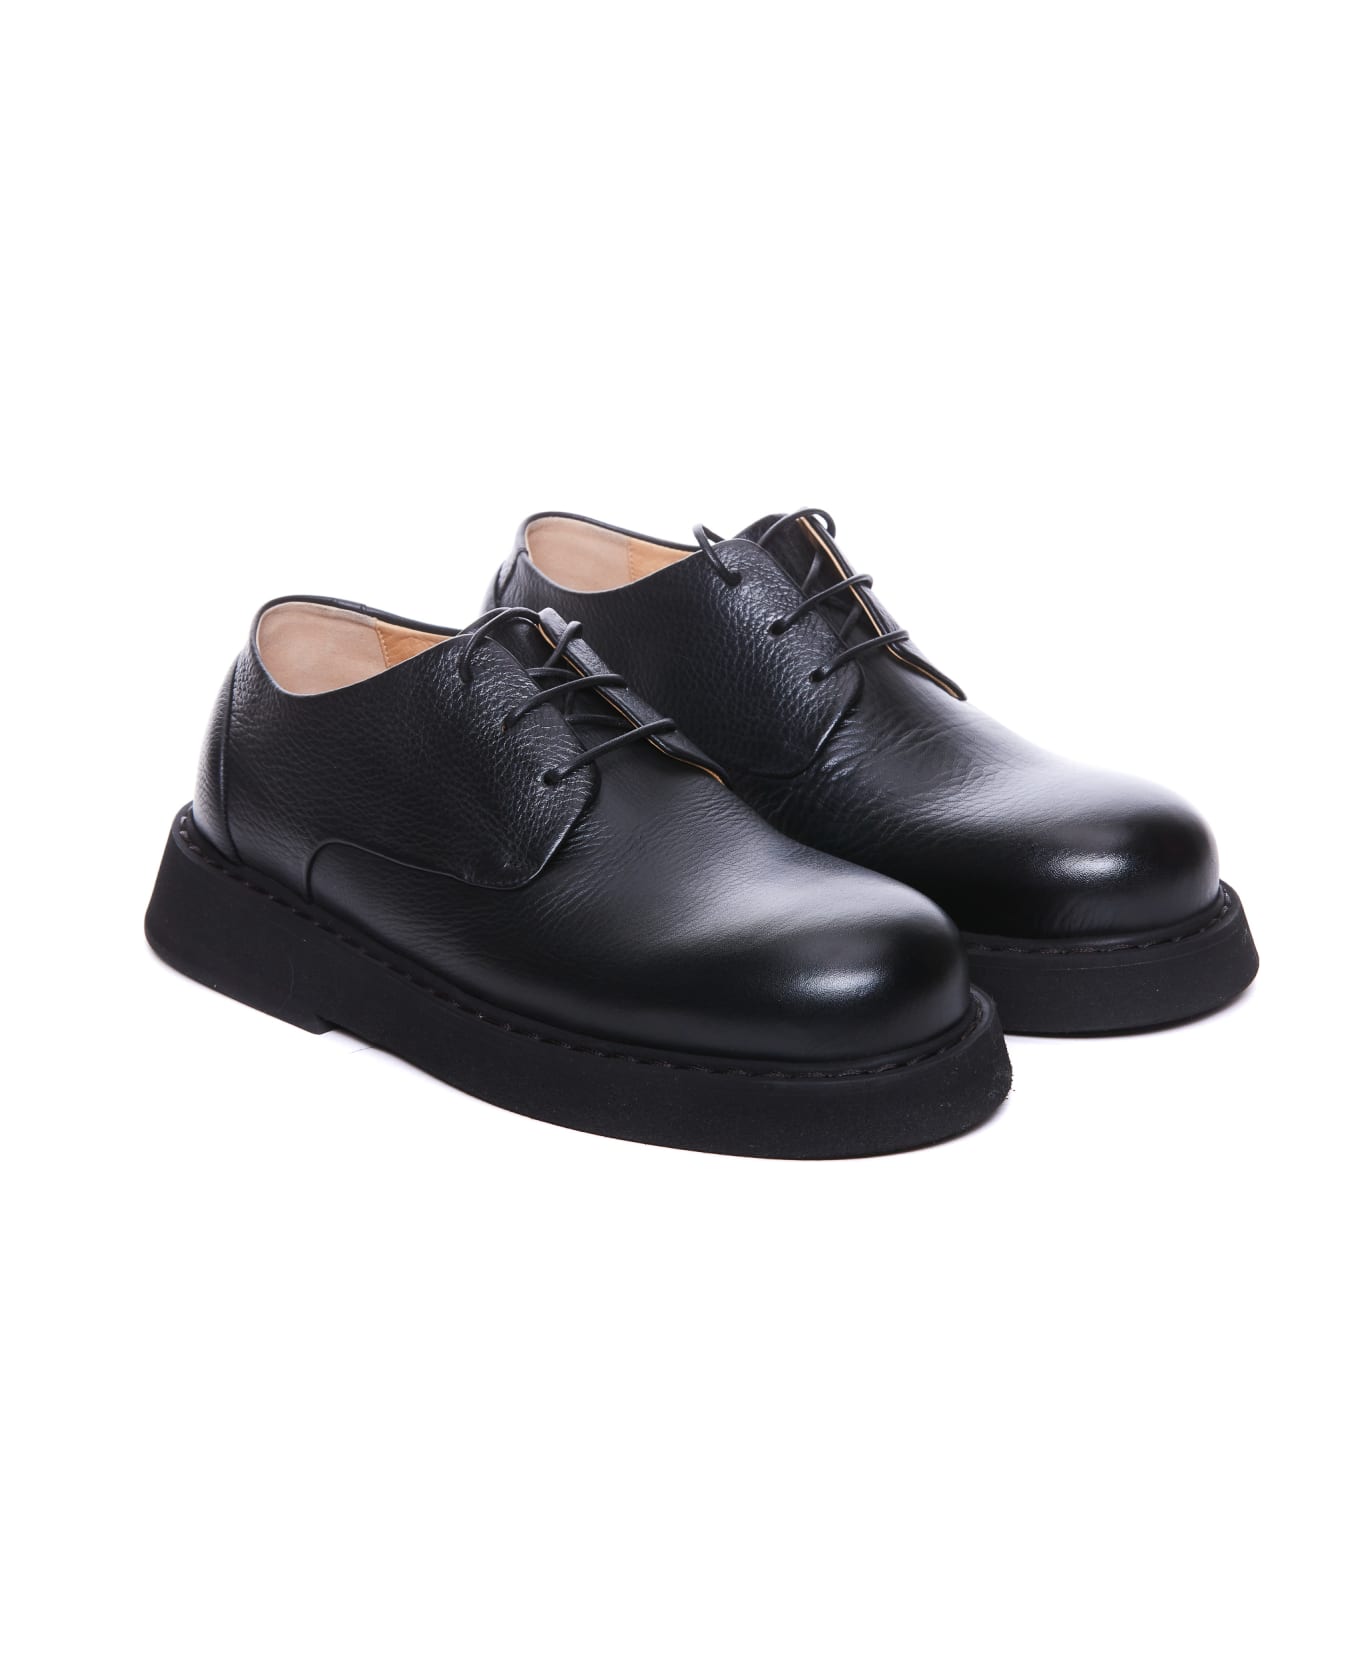 Marsell Spalla Derby Laced Up Shoes - Black